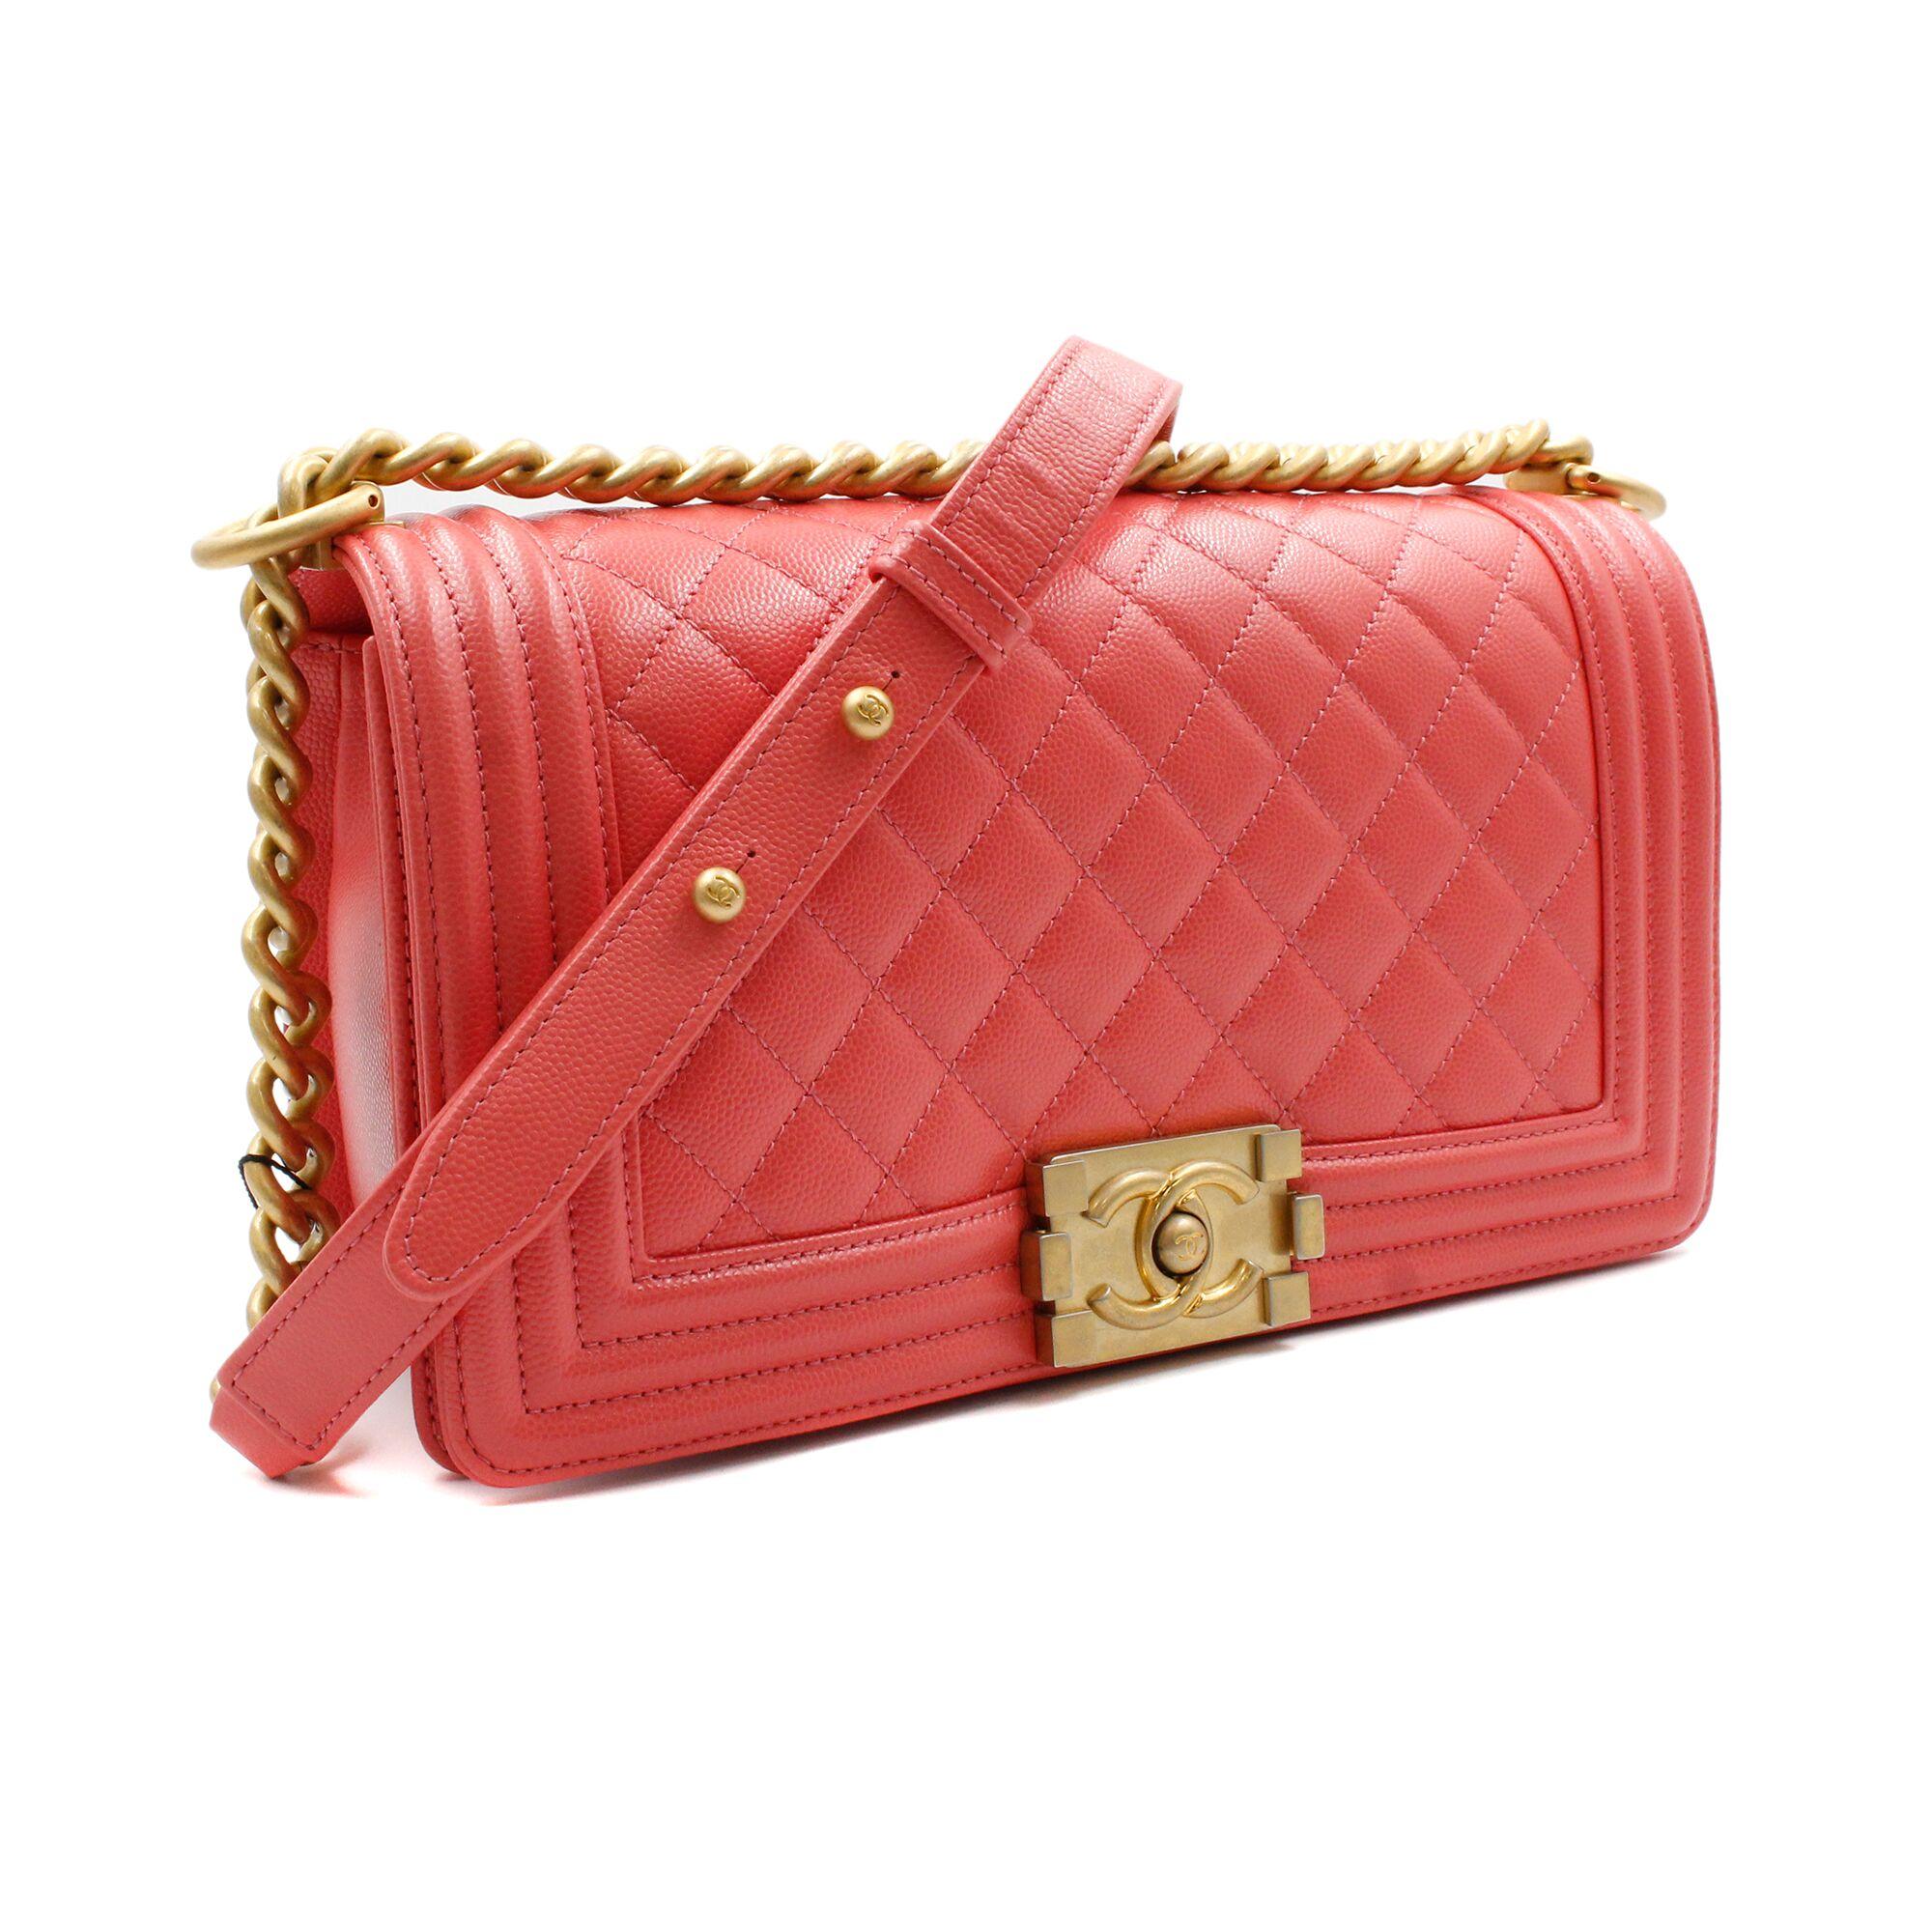 100% Authentic!
Chanel new medium Boy bag of pink shiny caviar (grained calfskin) leather with antique gold tone hardware.This bag features a full front flap with the Le Boy CC push lock closure and an antique gold tone chain link and pink leather